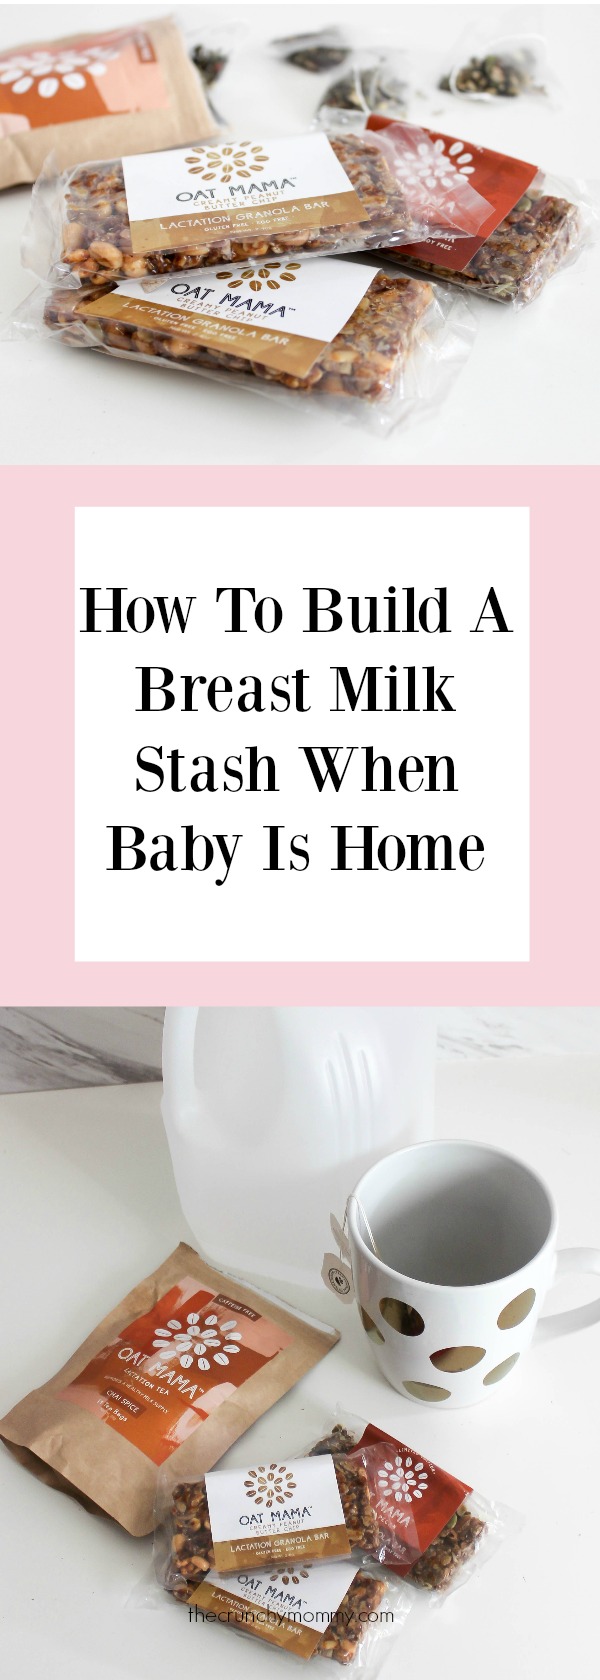 How To Build A Breast Milk Stash When Baby Is Home